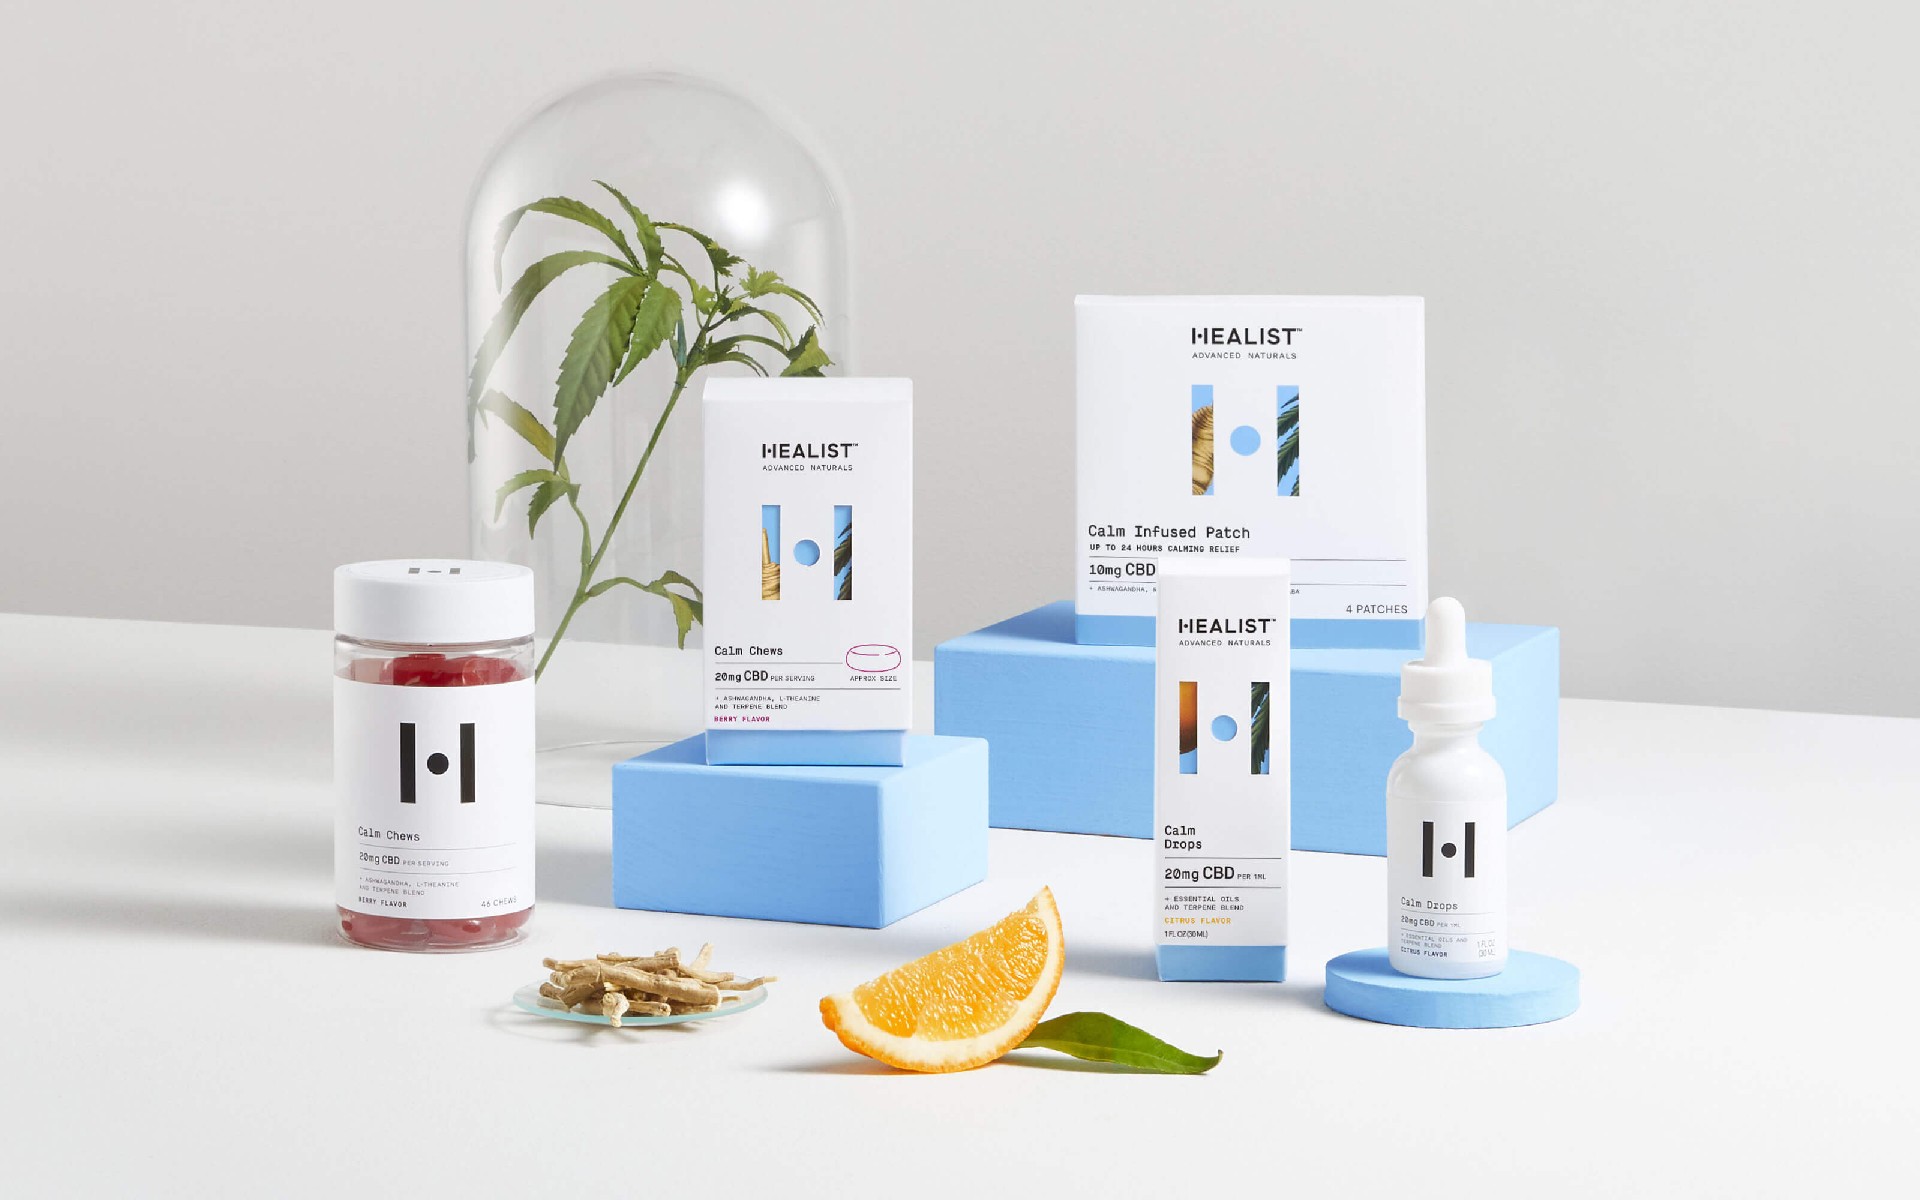 Healist cannabidiol CBD herbal health products pharmaceutical packaging design, balance of natural plants and modern science